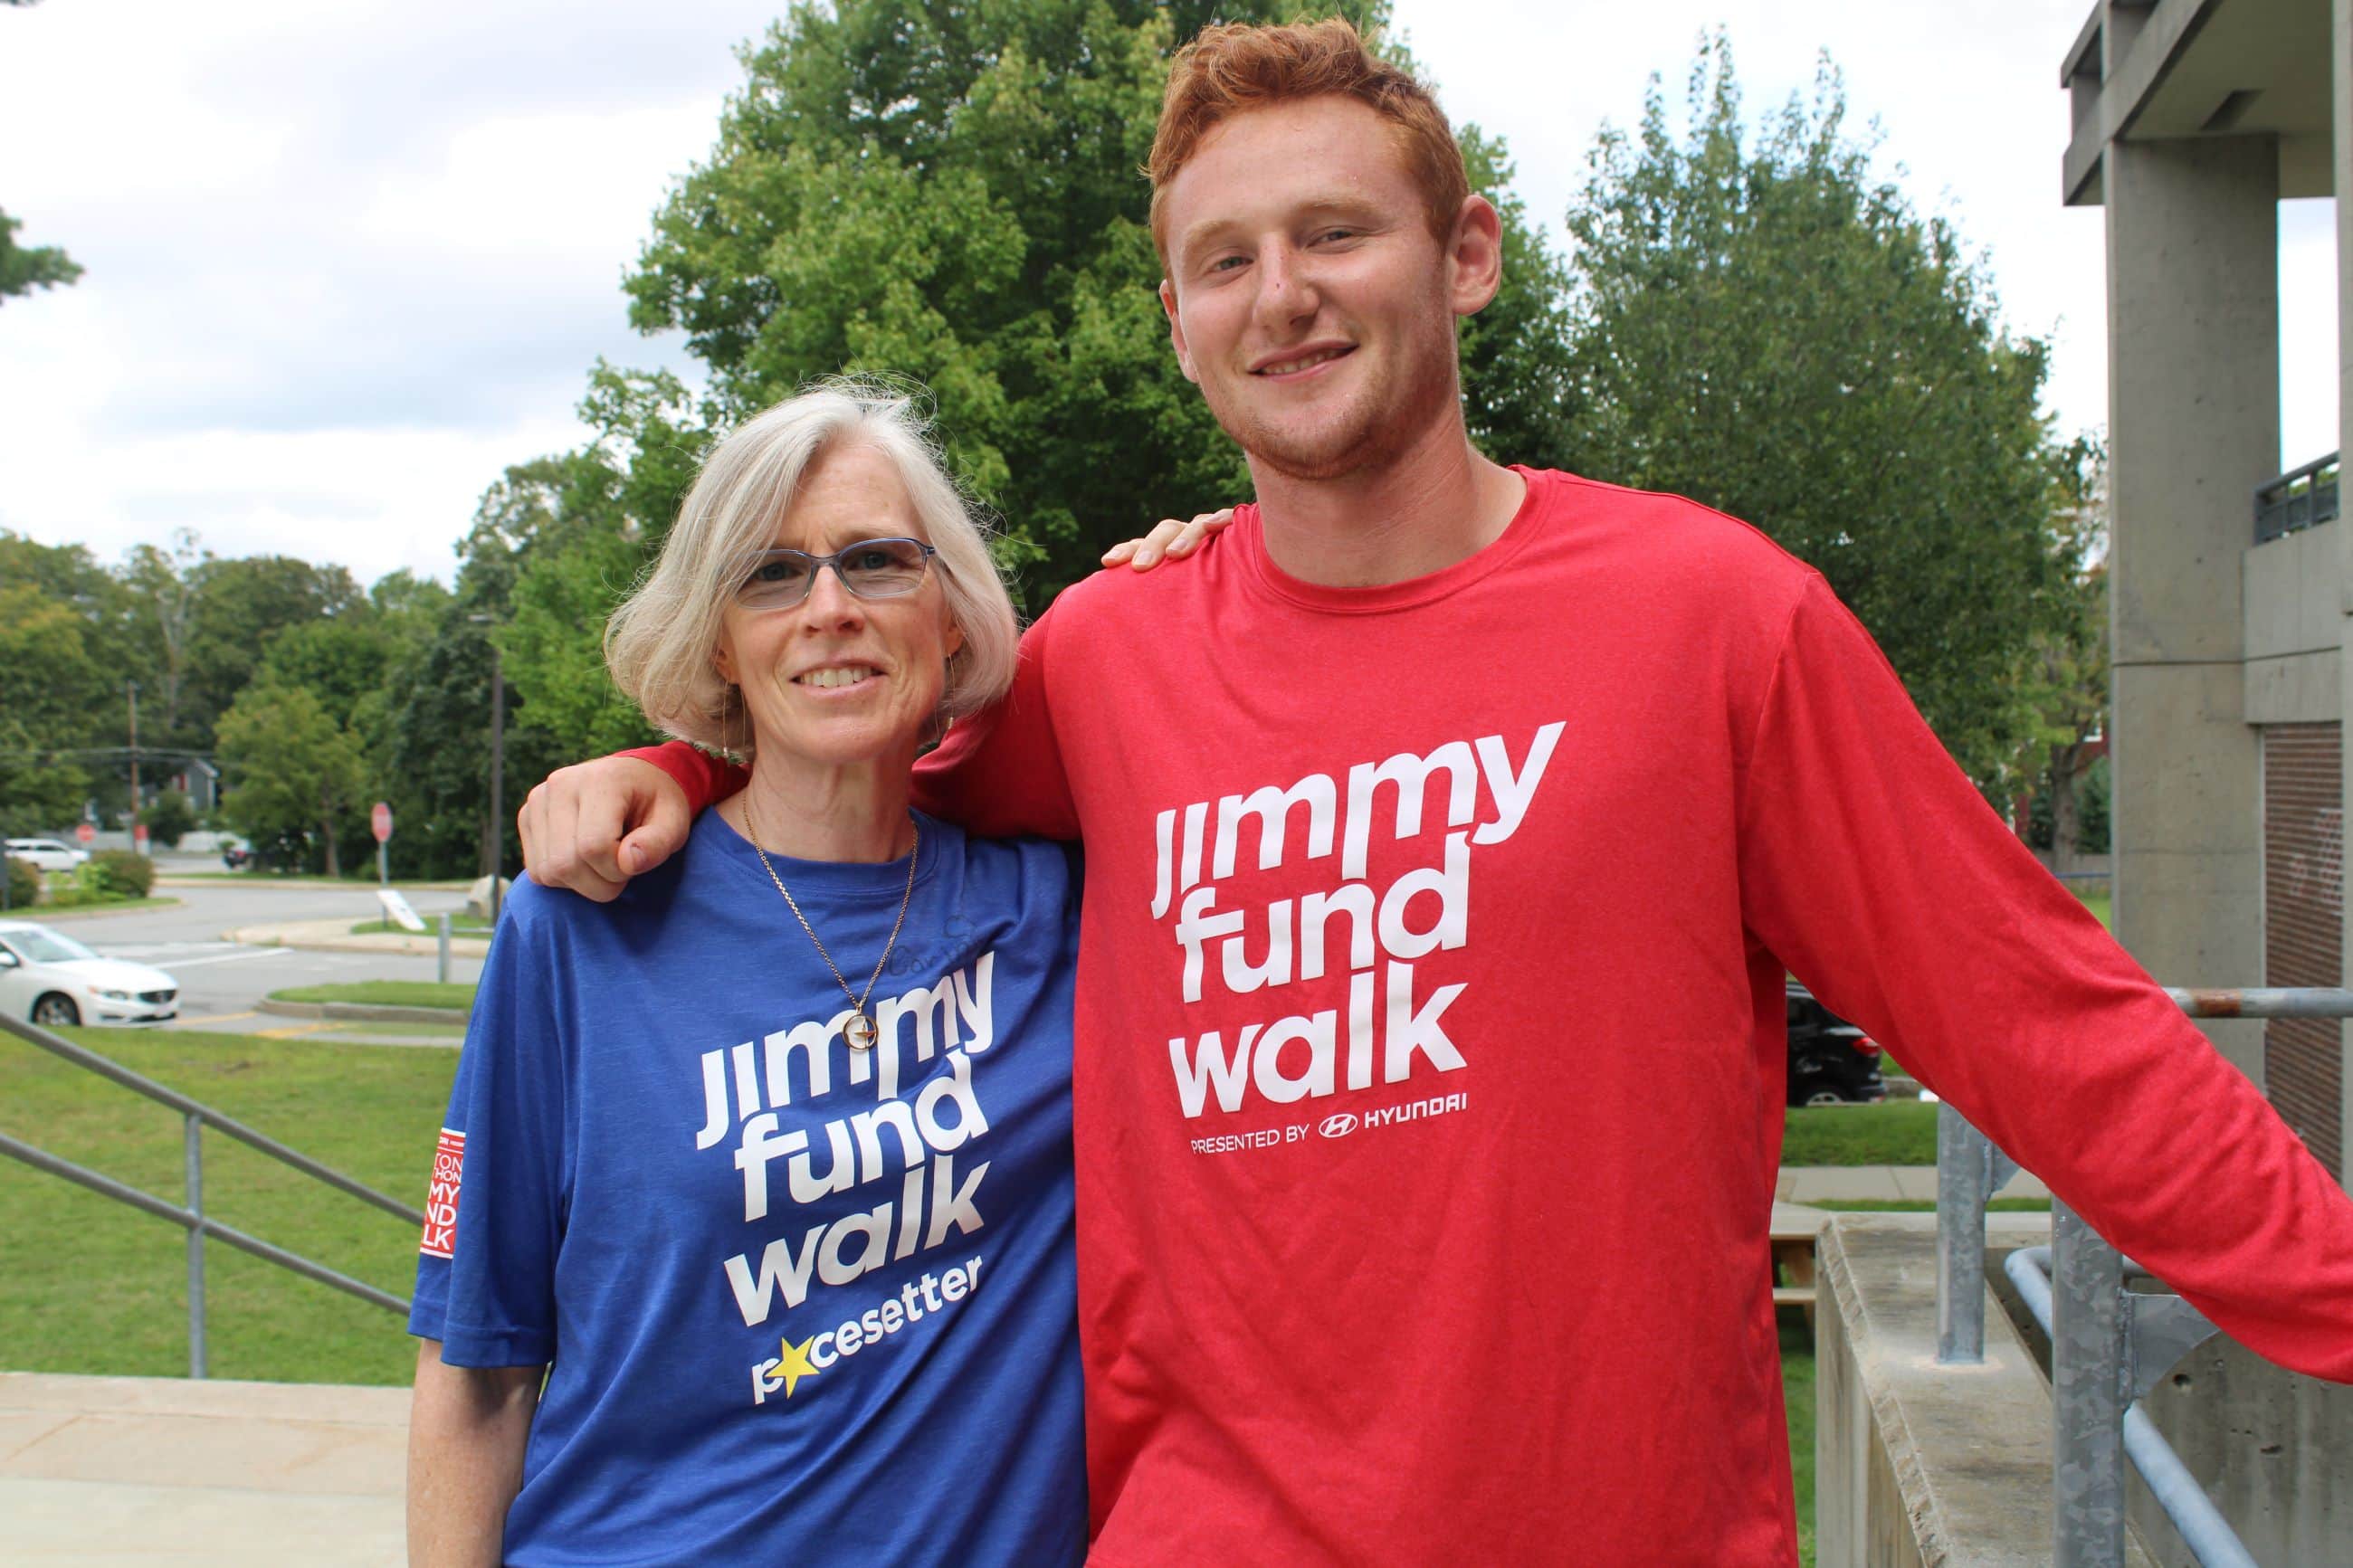 WHS paraprofessionals taking part in Jimmy Fund Walk